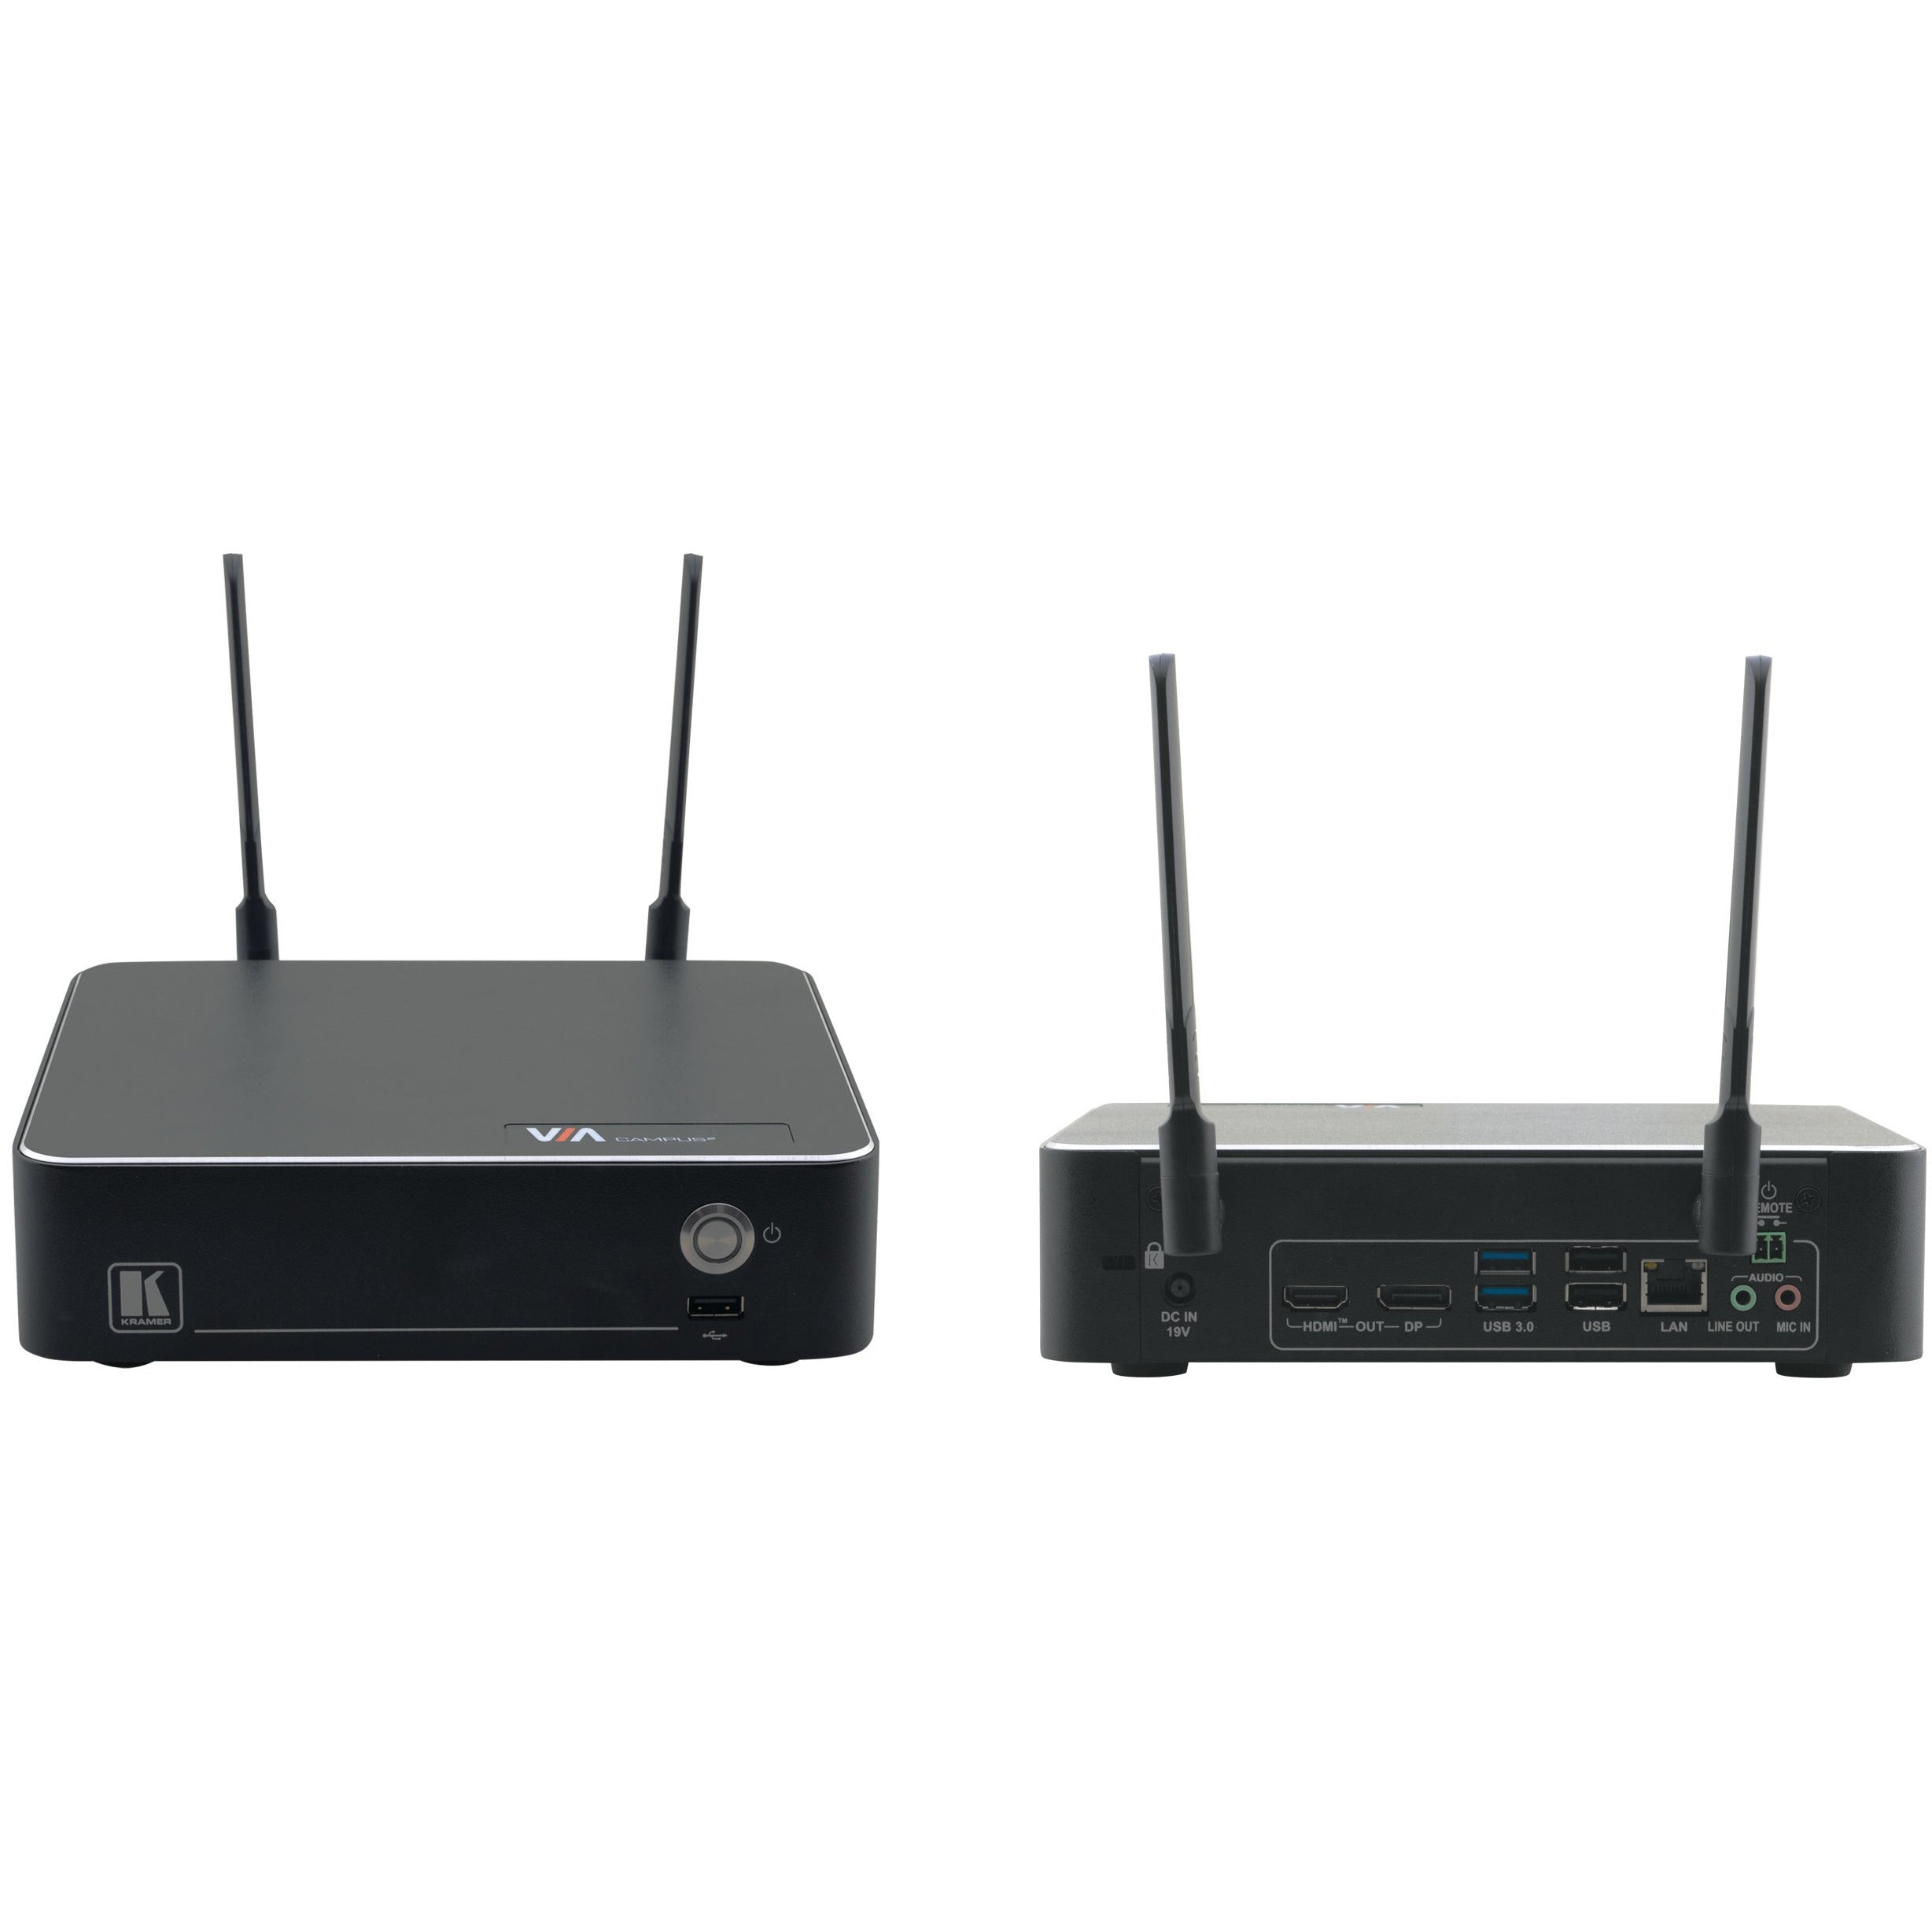 VIA Campus² PLUS 4K60 Simultaneous Wired and Wireless Presentation &  Collaboration Solution